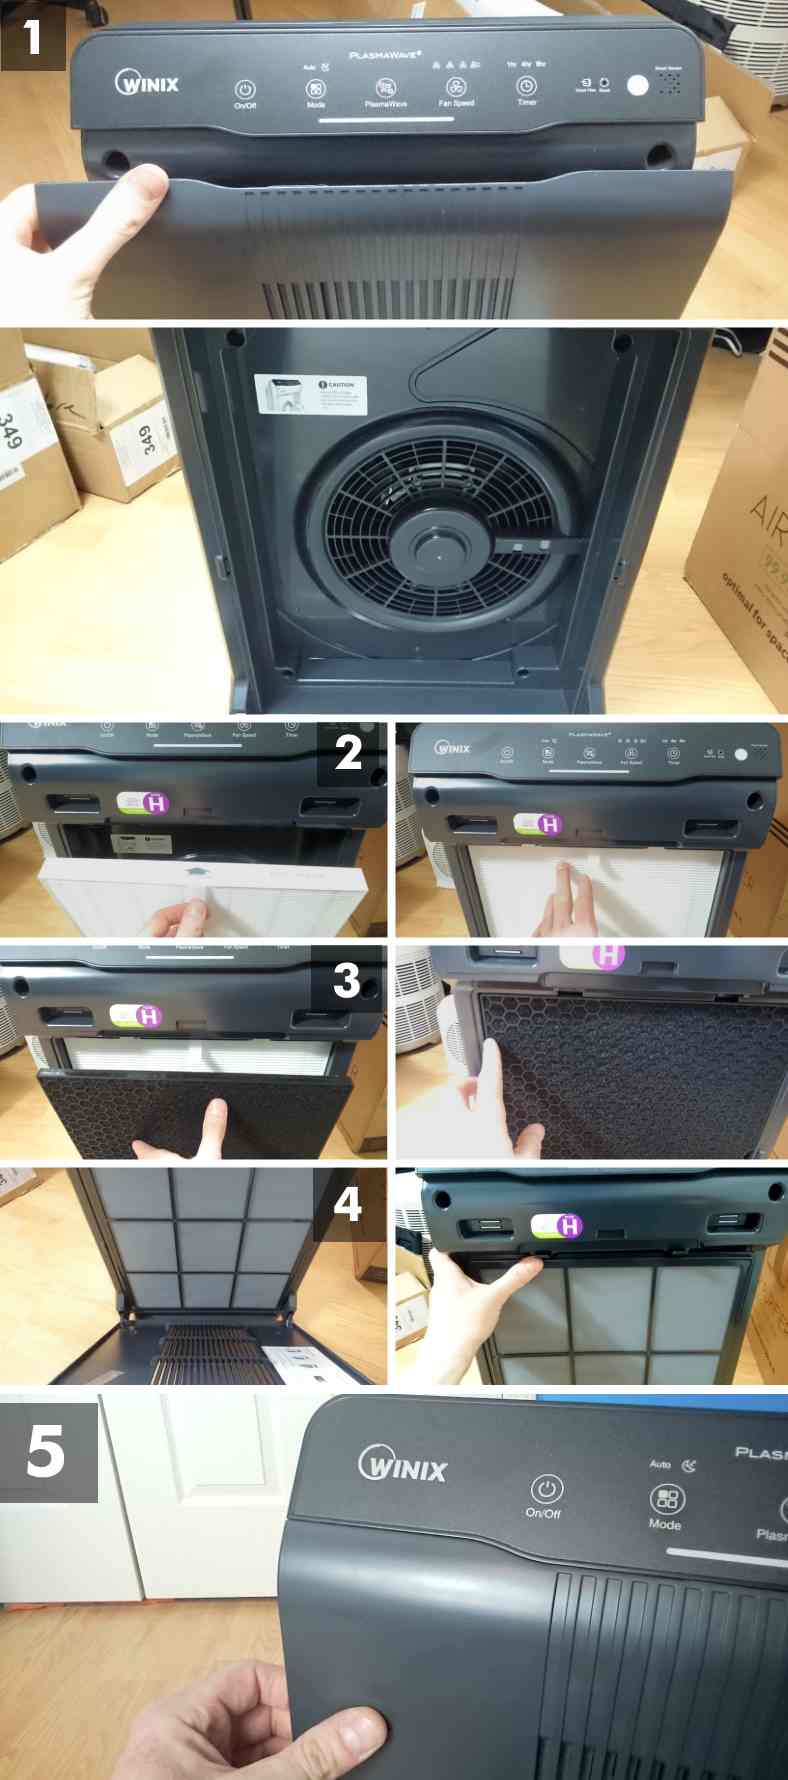 Illustrated images showing how to install filters on the Winix 5500-2 and 5500-3 air purifiers